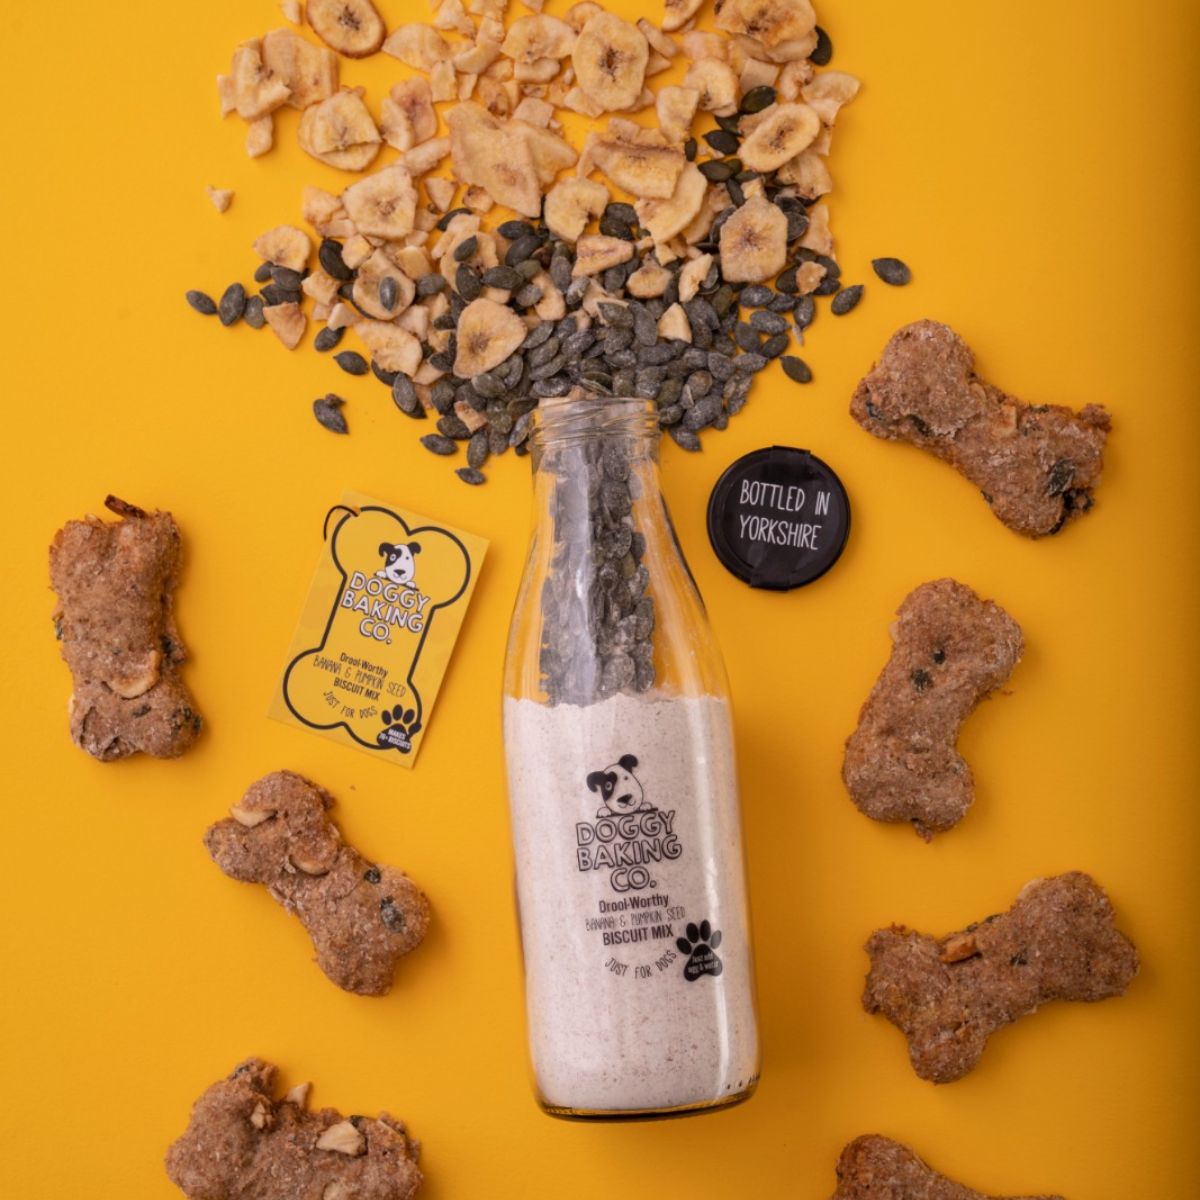 Pumpkin Seed & Banana Biscuit Mix, Banana Toy & Olivewood Gift Box - Doggy Baking Co by The Bottled Baking Co